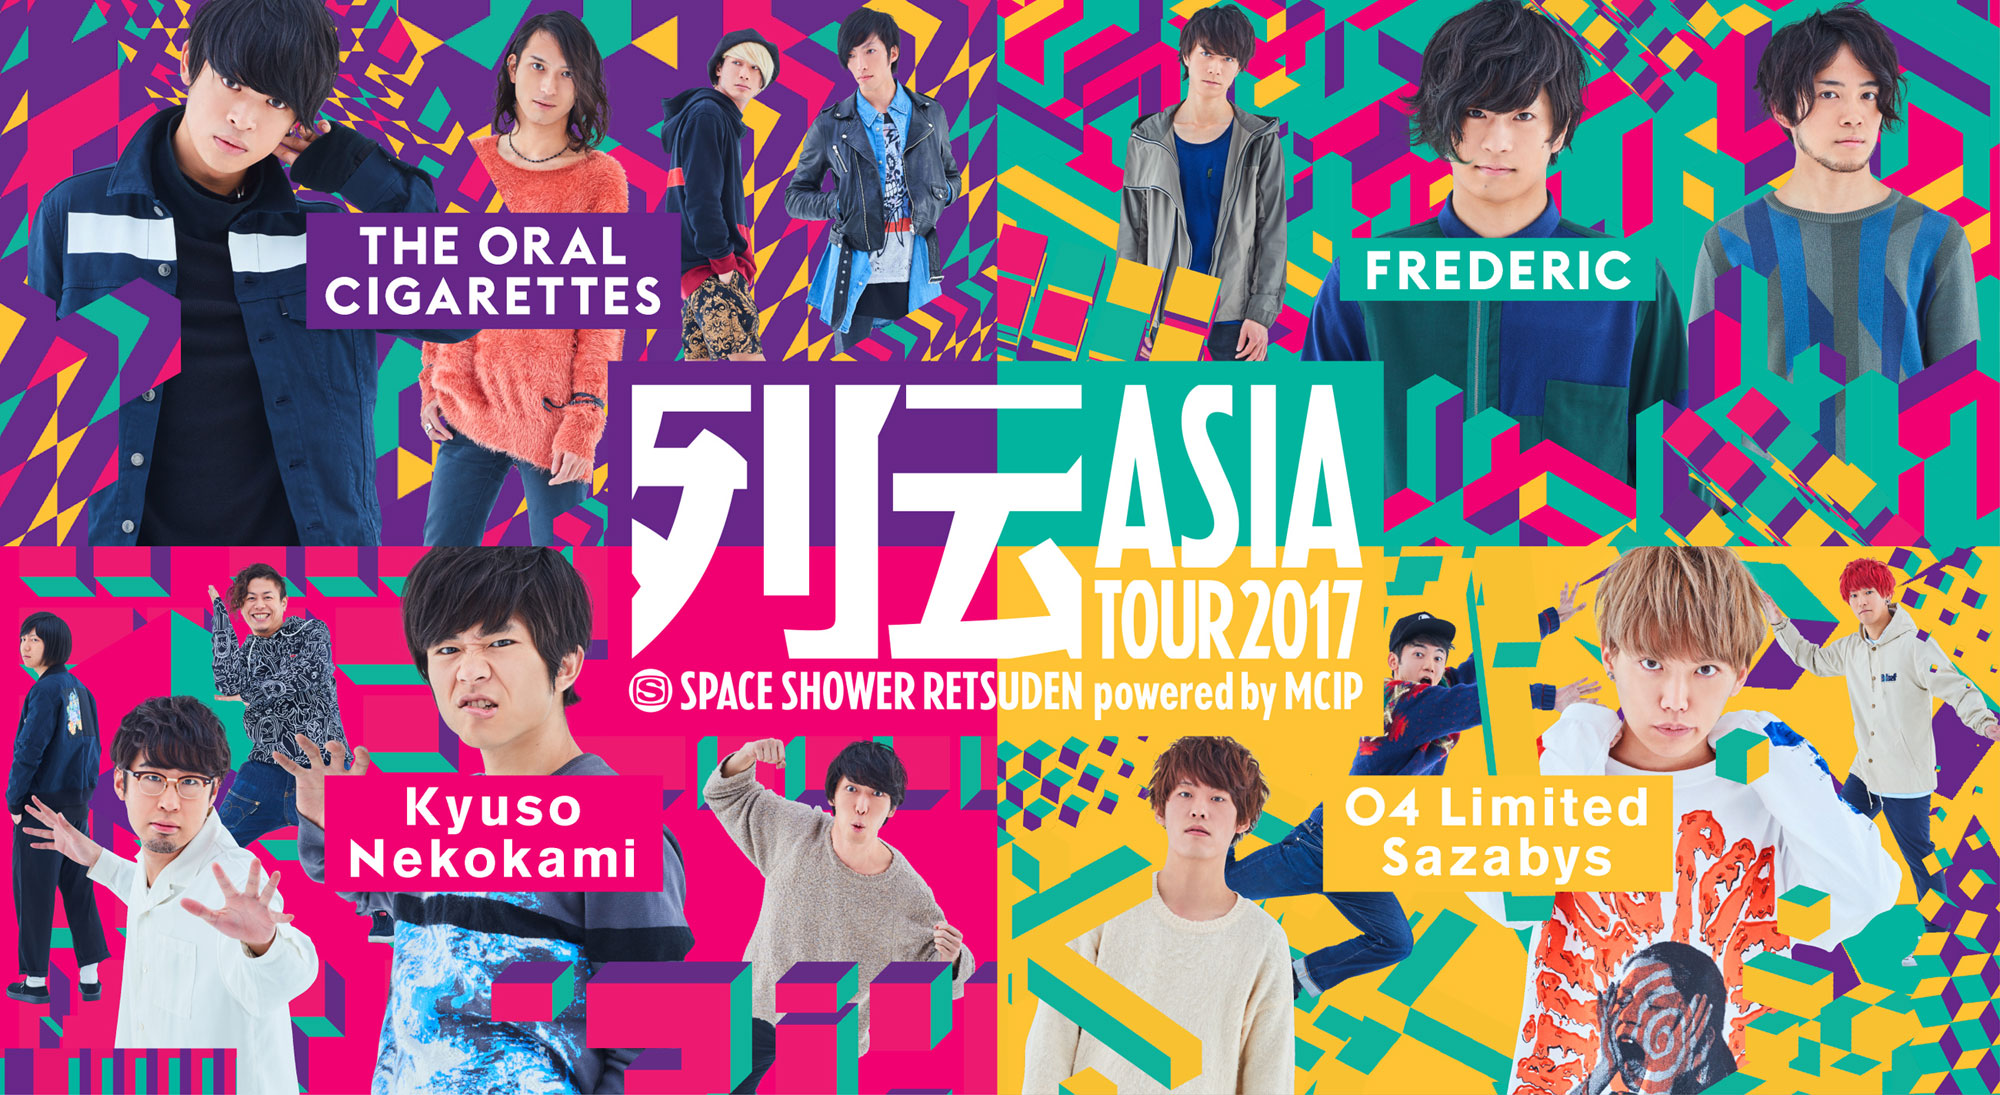 SPACE SHOWER RETSUDEN ASIA TOUR 2017 powered by MCIP